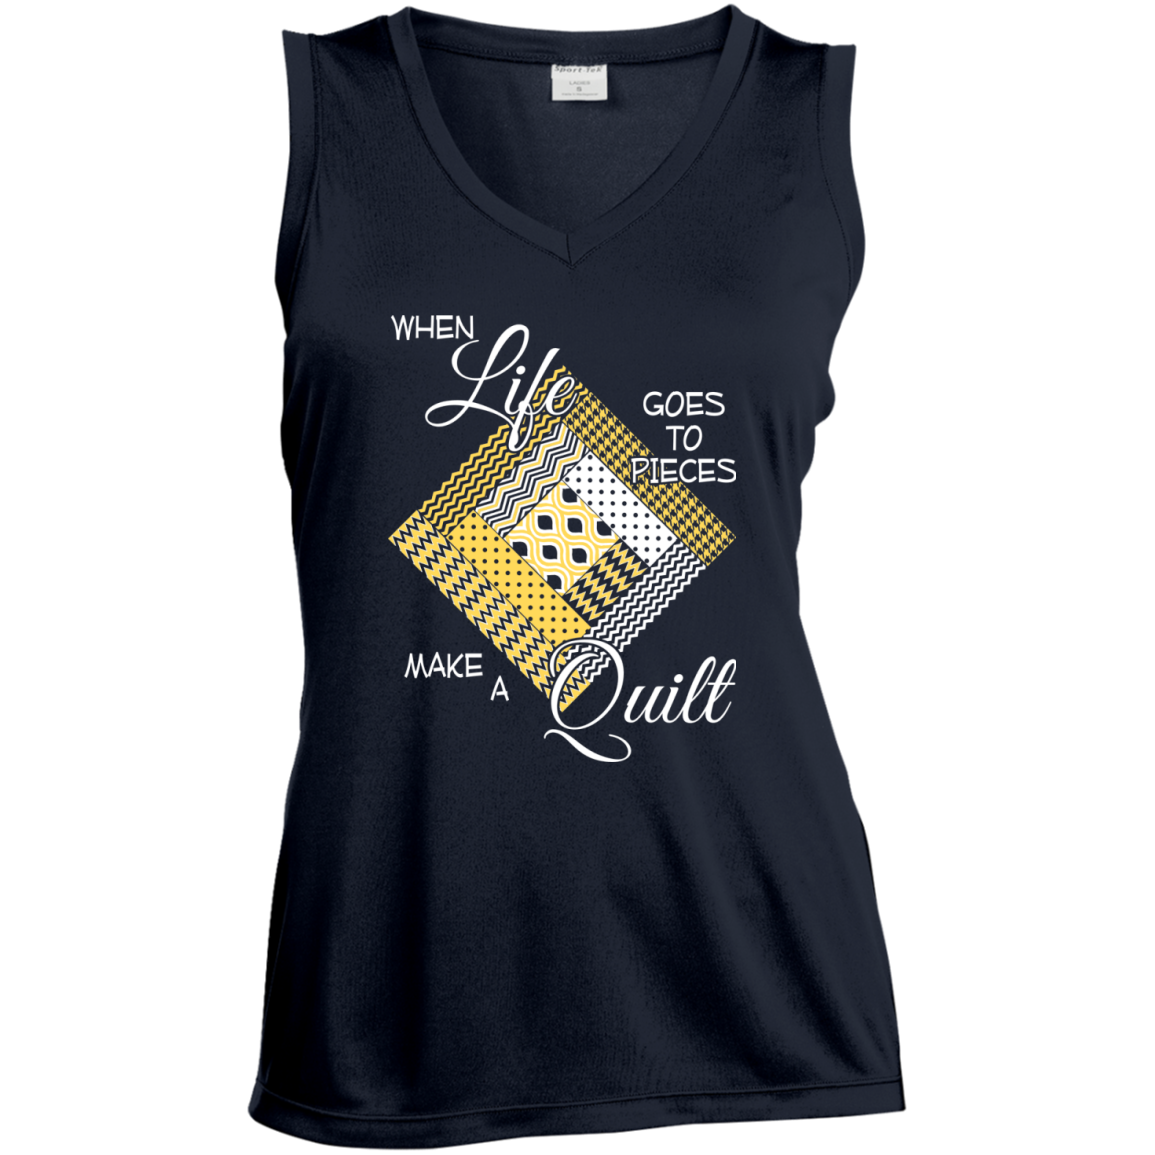 Make a Quilt (yellow) Ladies Sleeveless V-Neck - Crafter4Life - 4